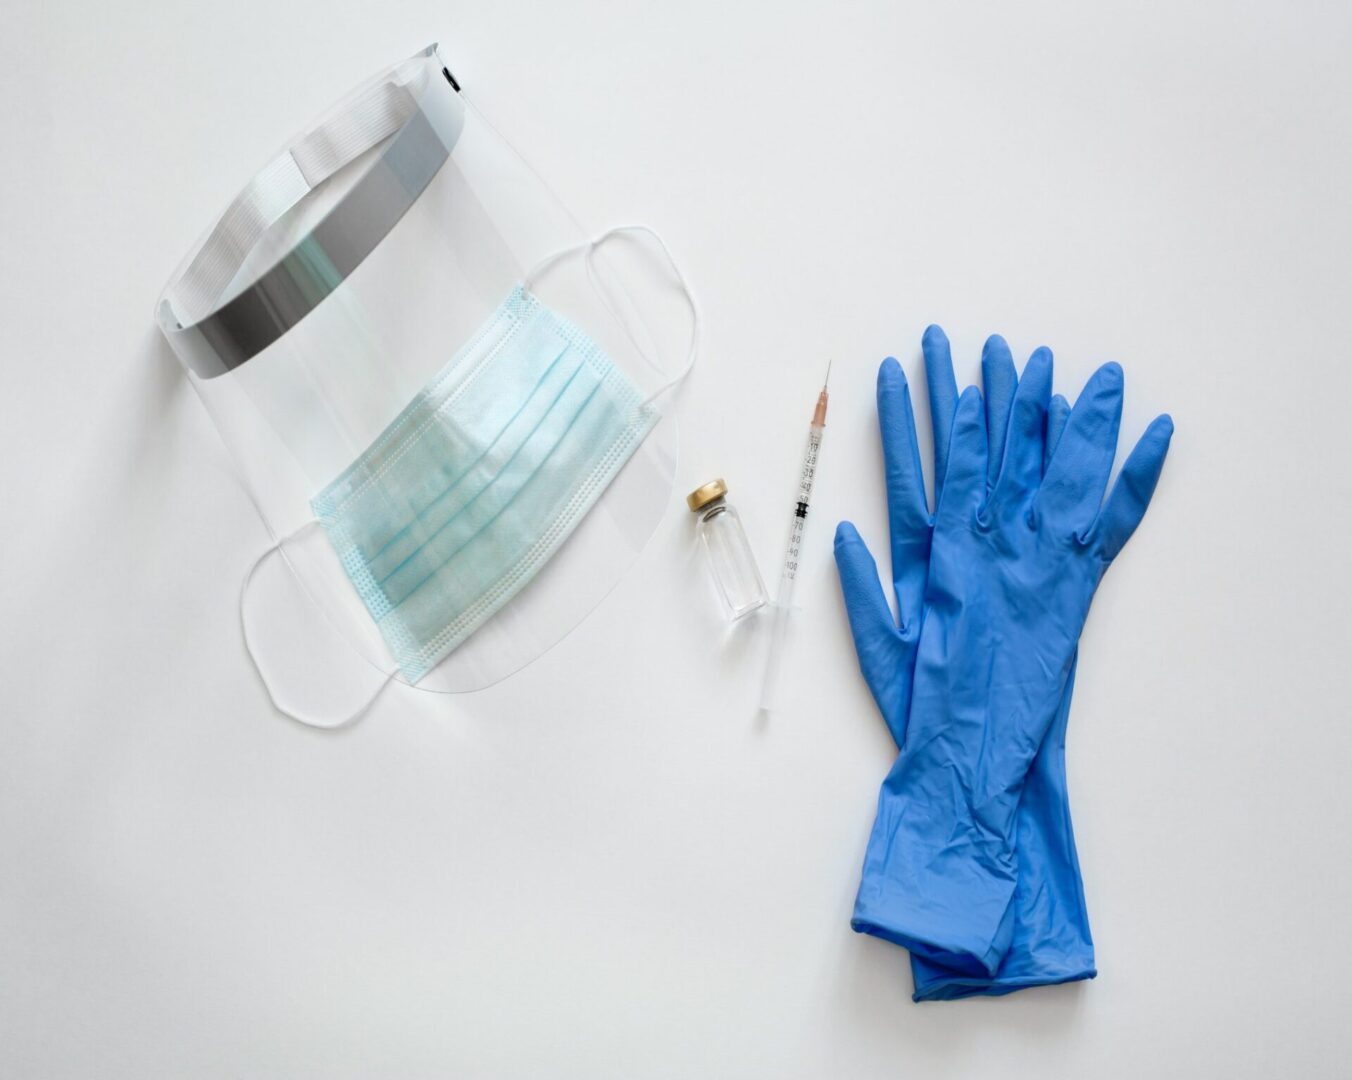 Tips for Proper PPE Disposal